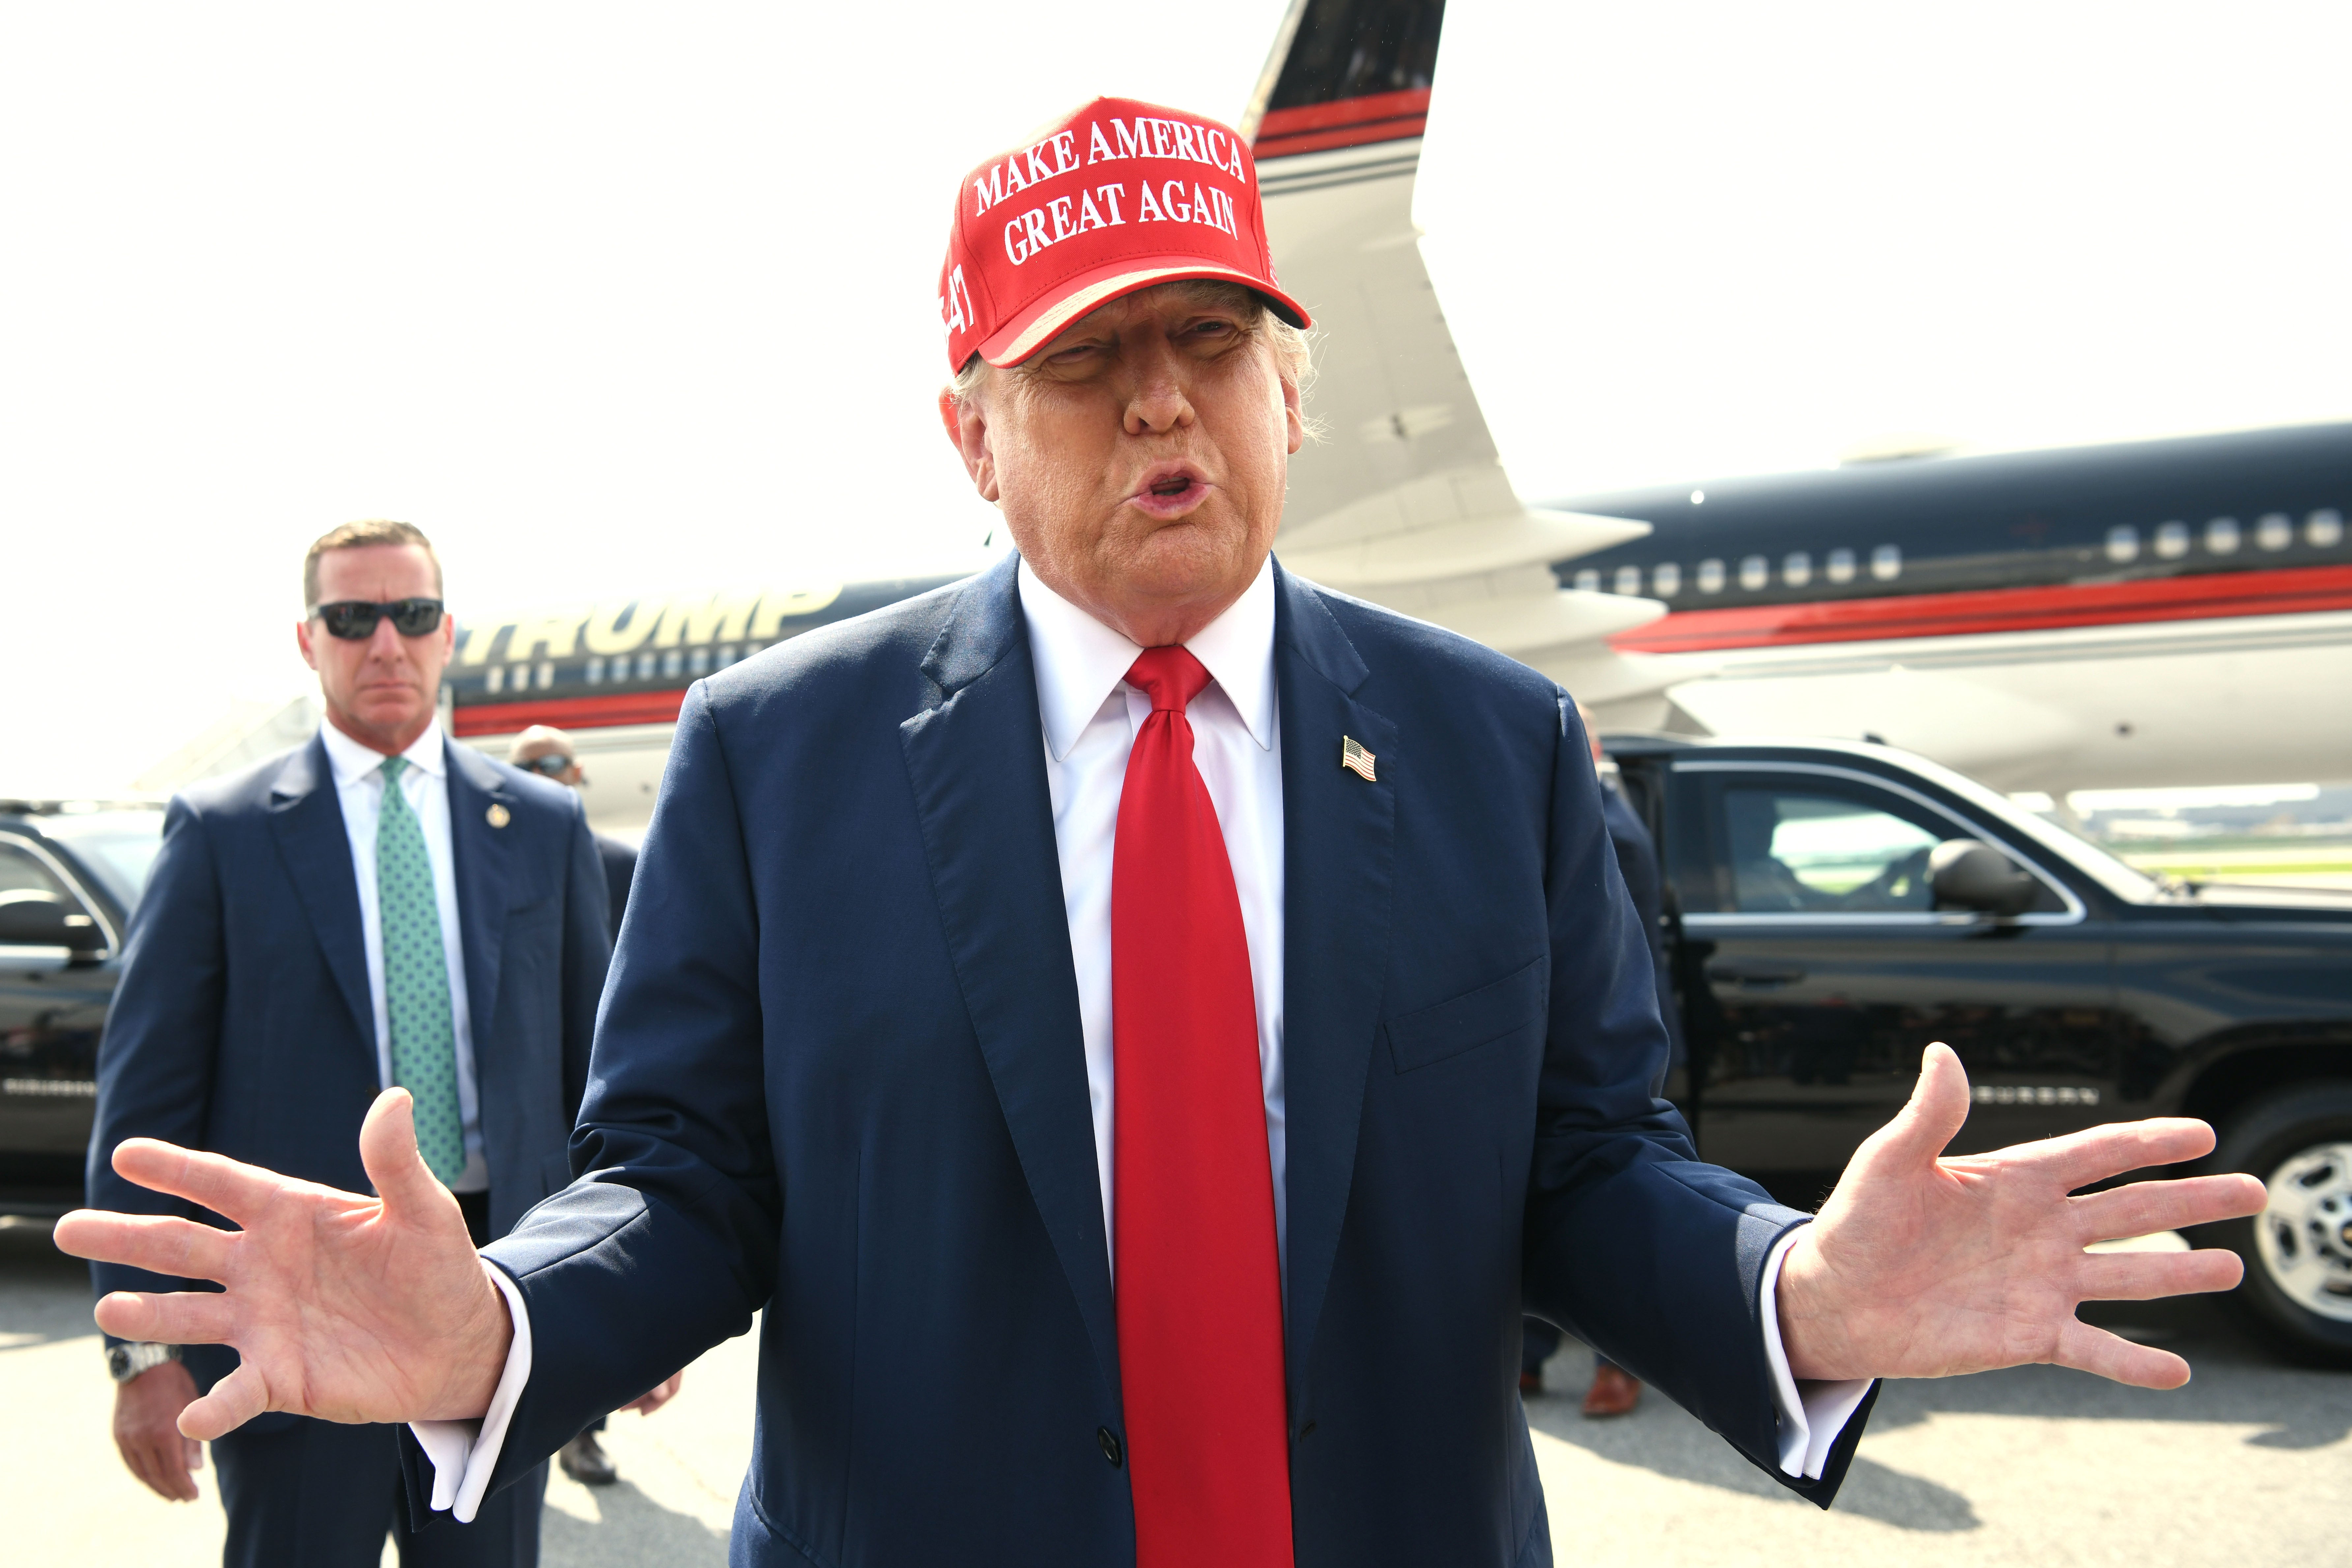 Donald Trump speaks to reporters on the campaign trail this week